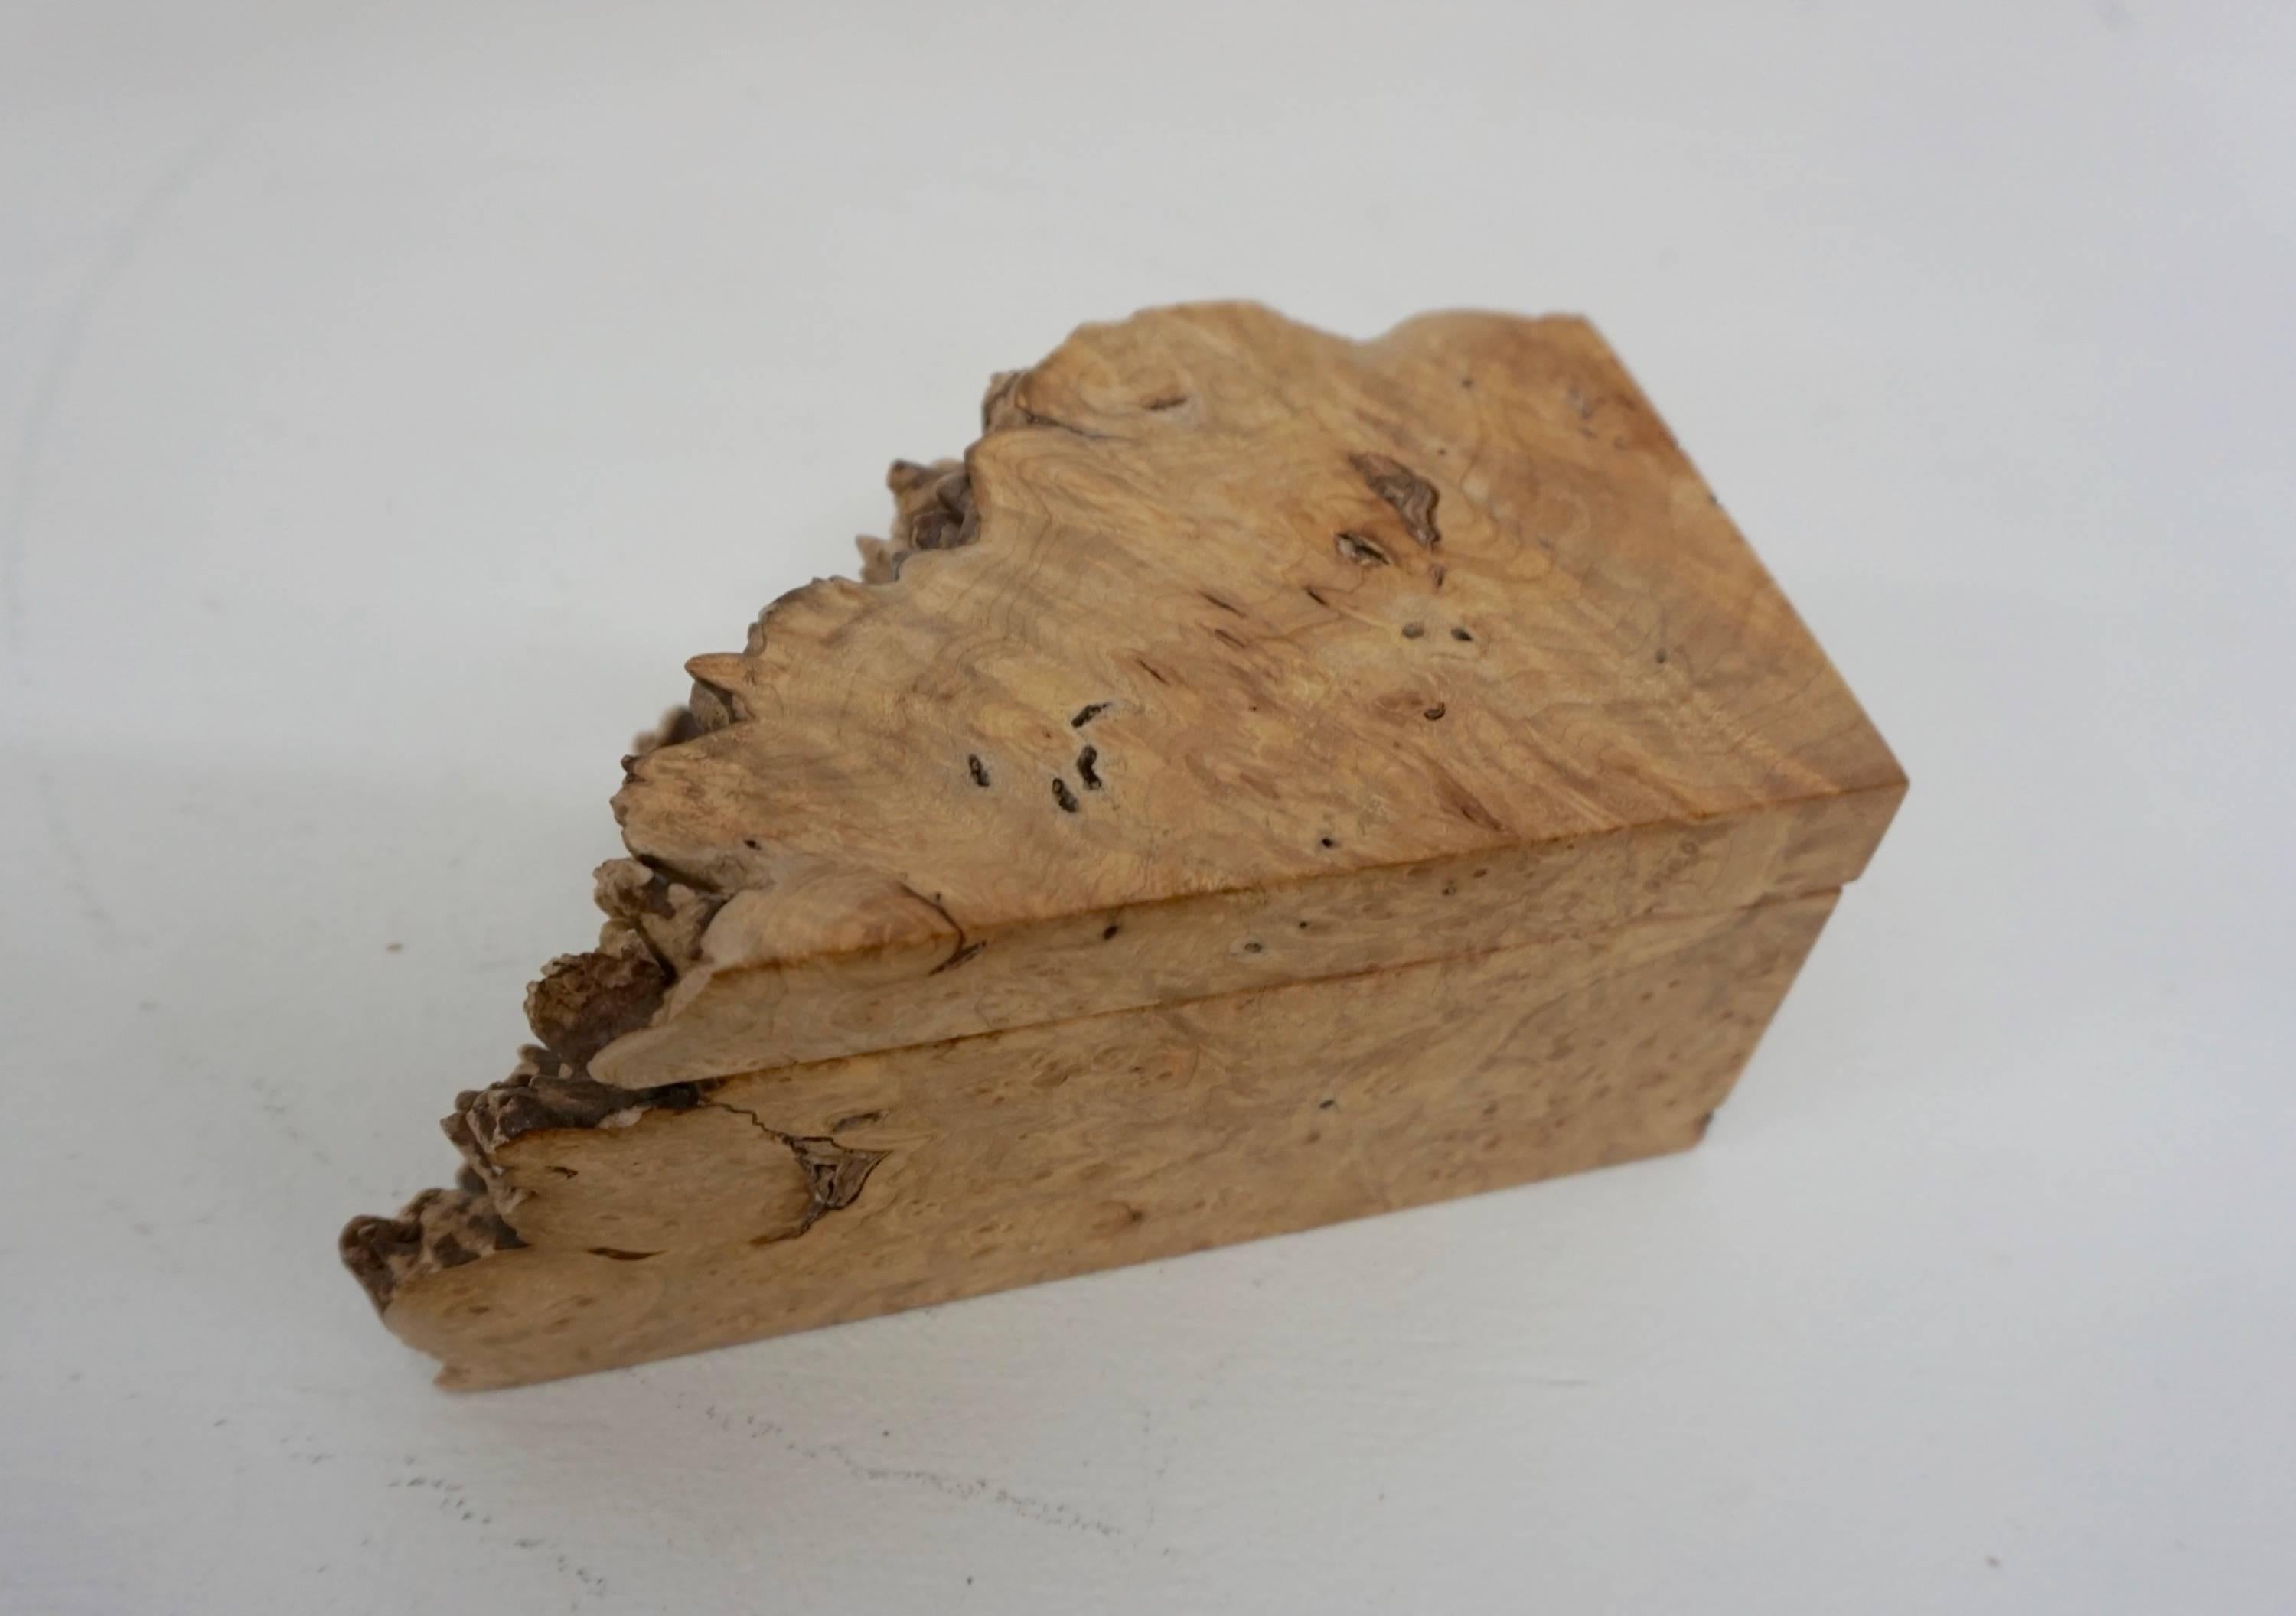 Elkan was a master woodworker in Oregon creating furniture and accessories. This jewelry or stash box is made from olive burl and signed on the bottom.